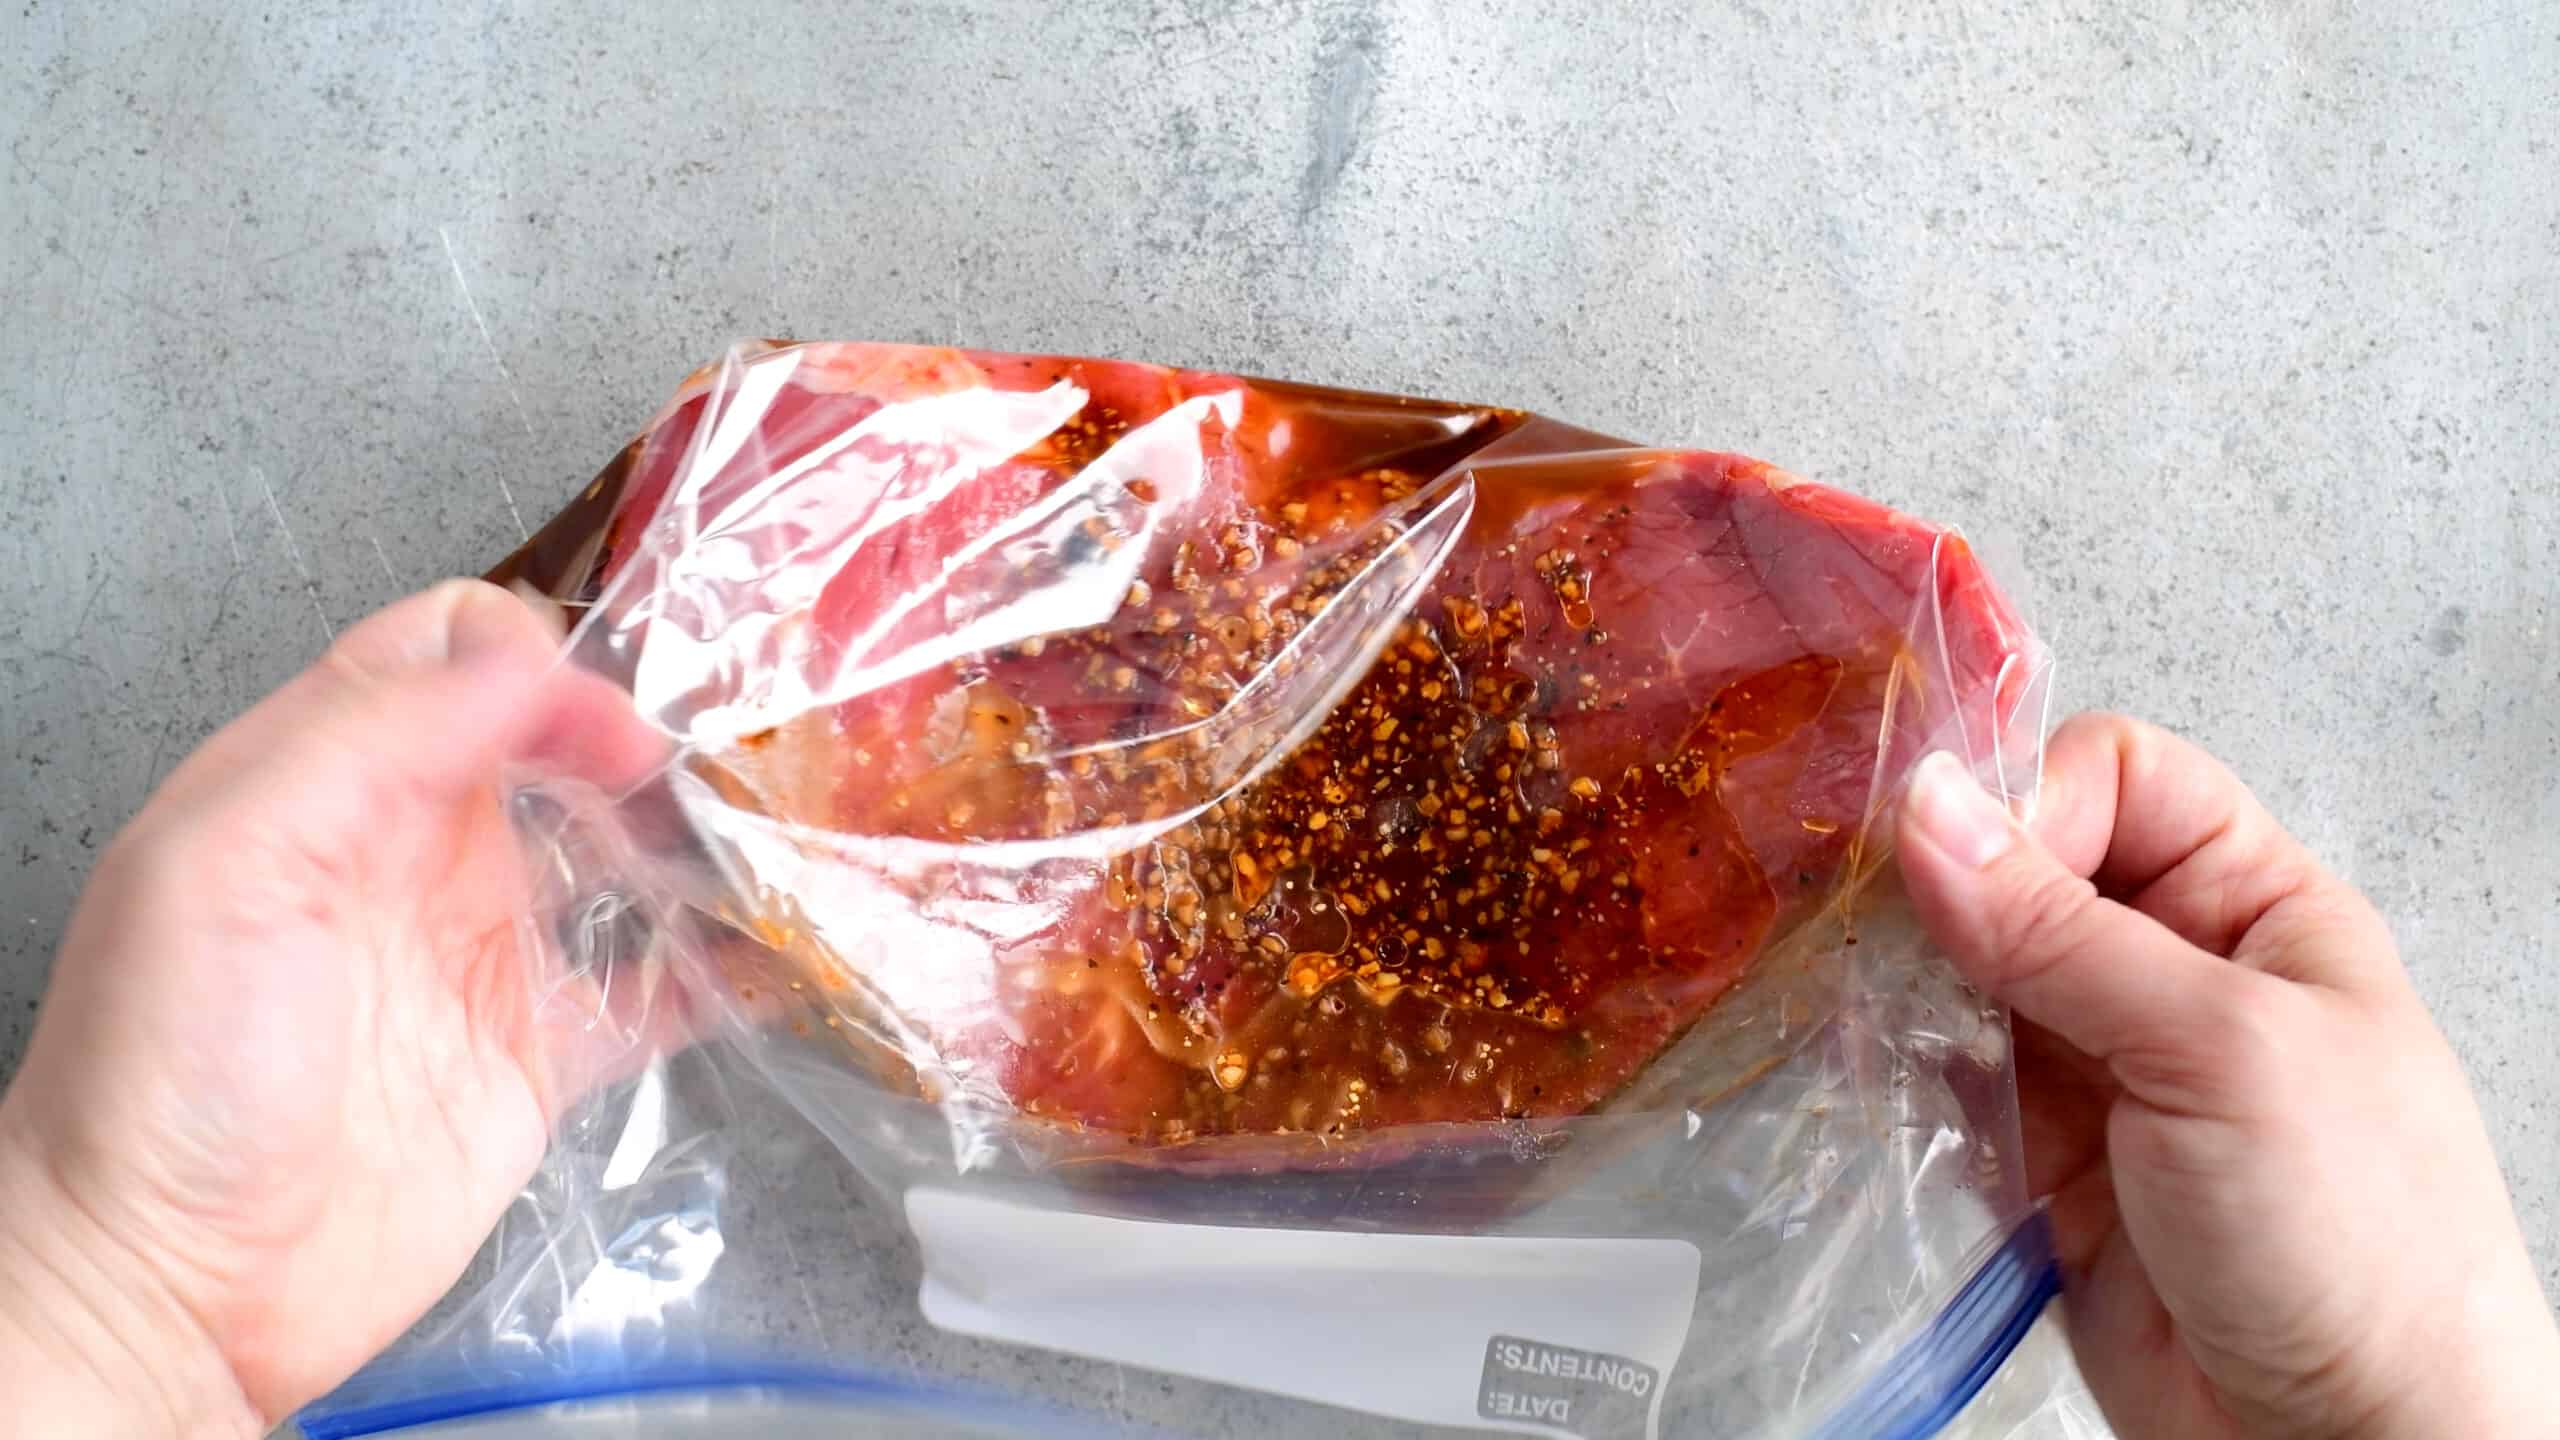 bag with steak and marinade